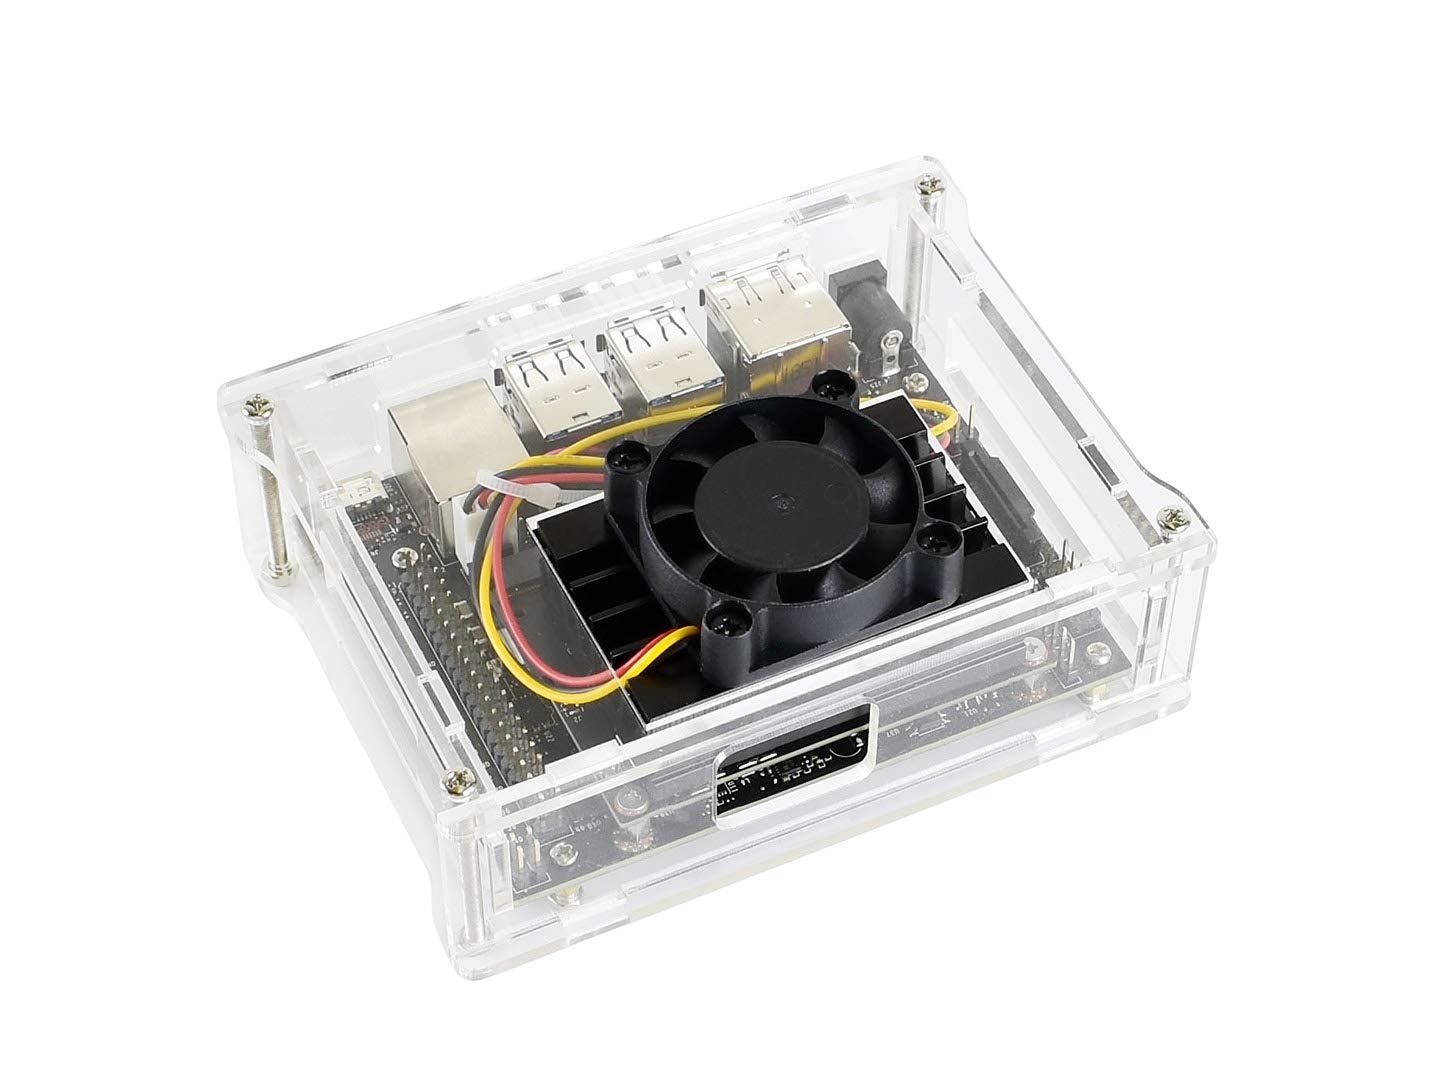 Waveshare Acrylic Case (Type A) and Dedicated Cooling Fan for The Jetson Nano Developer Kit